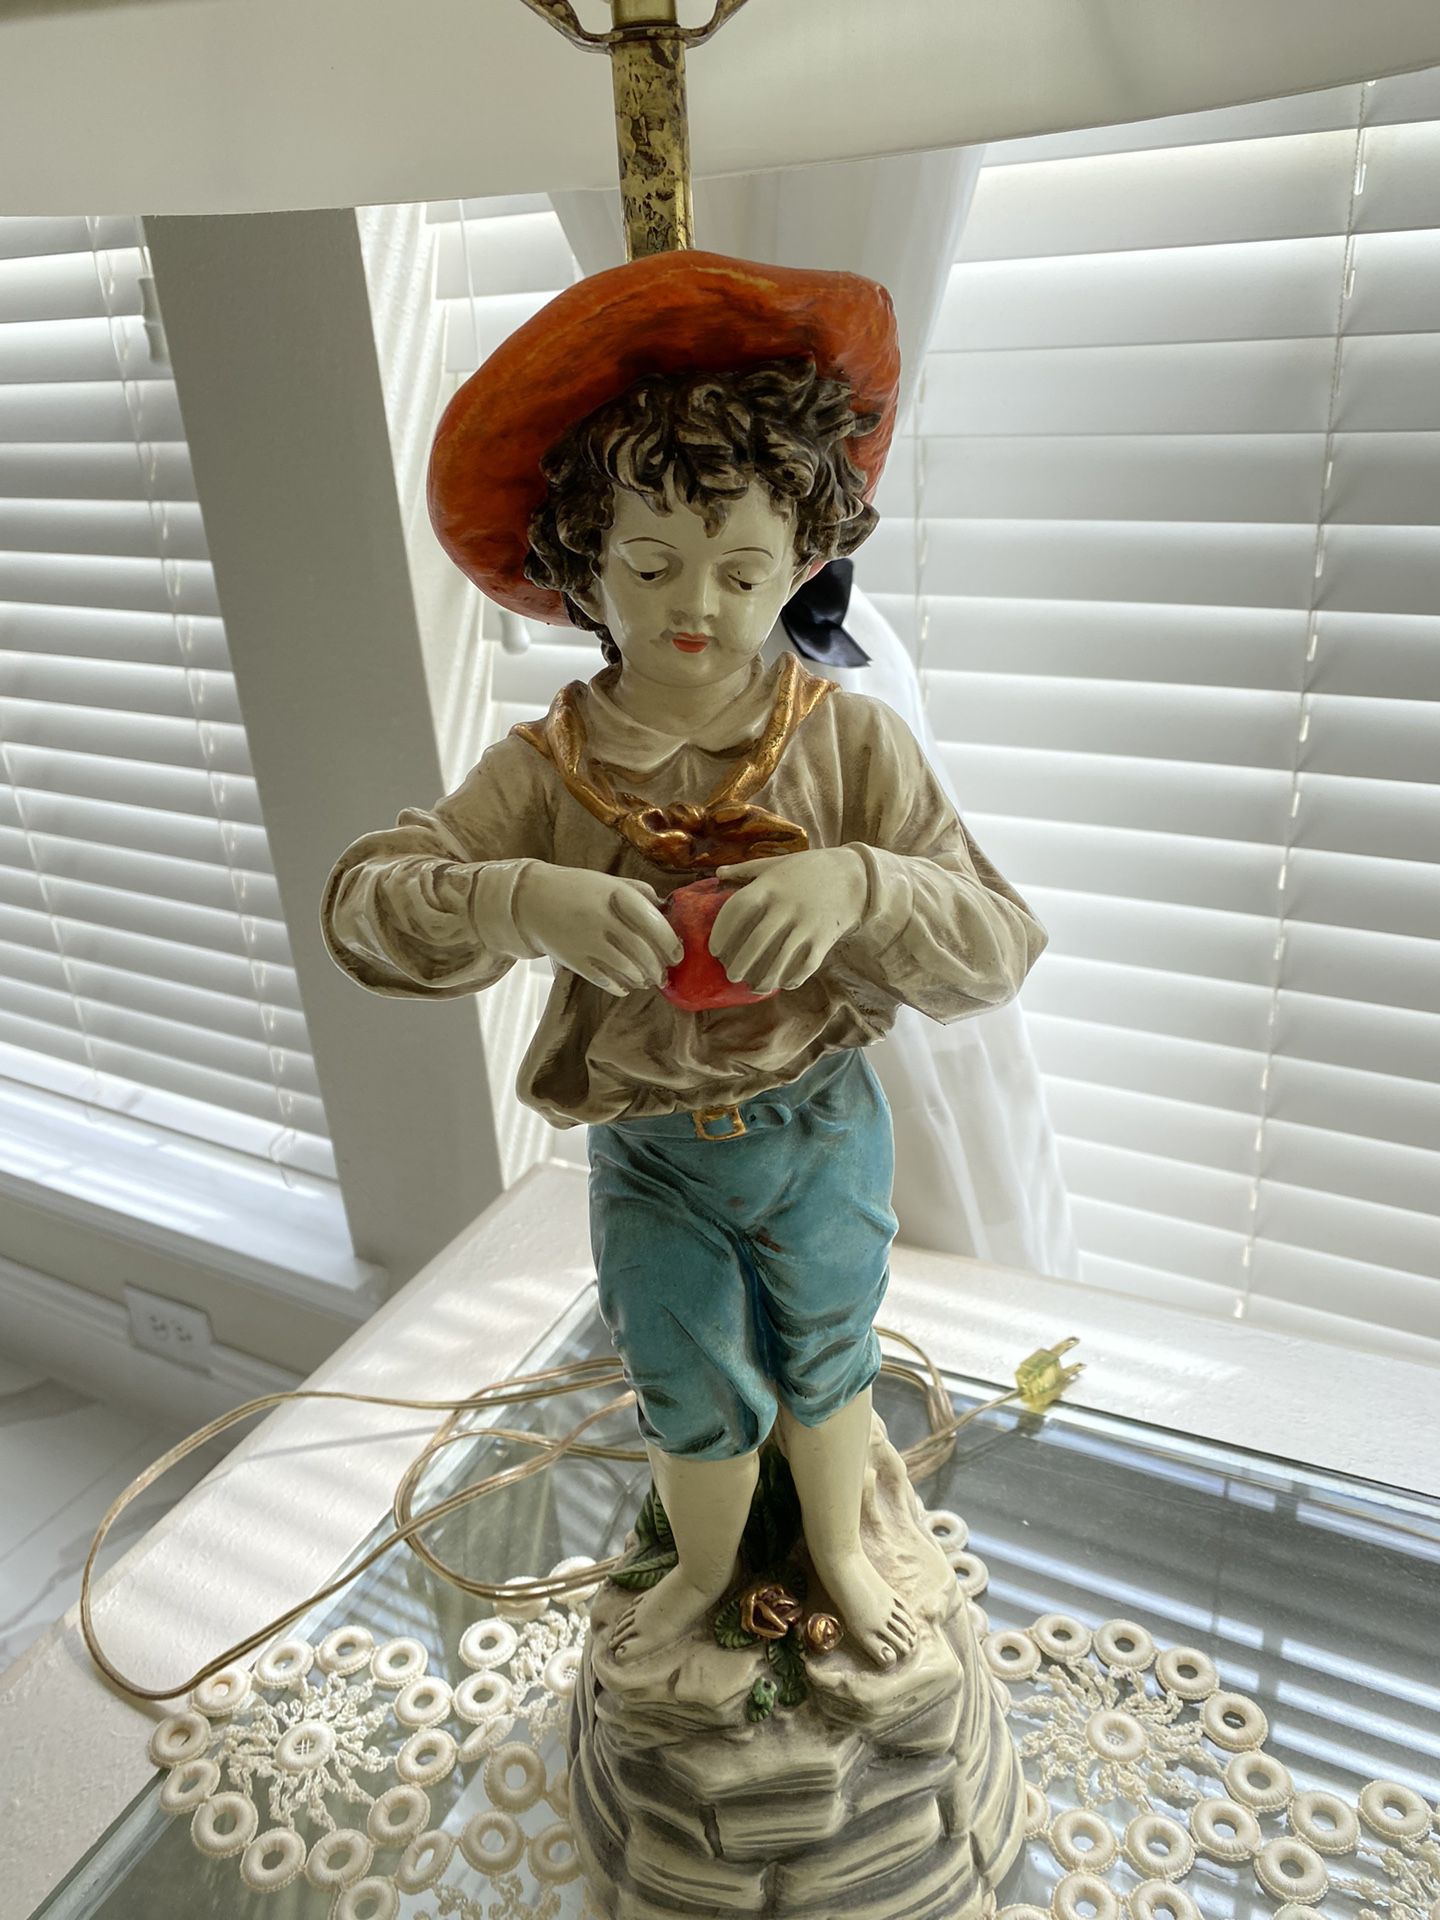 A Set Of 2 Vintage/Antique Table Lamps ( A Boy And A Girl Statues)